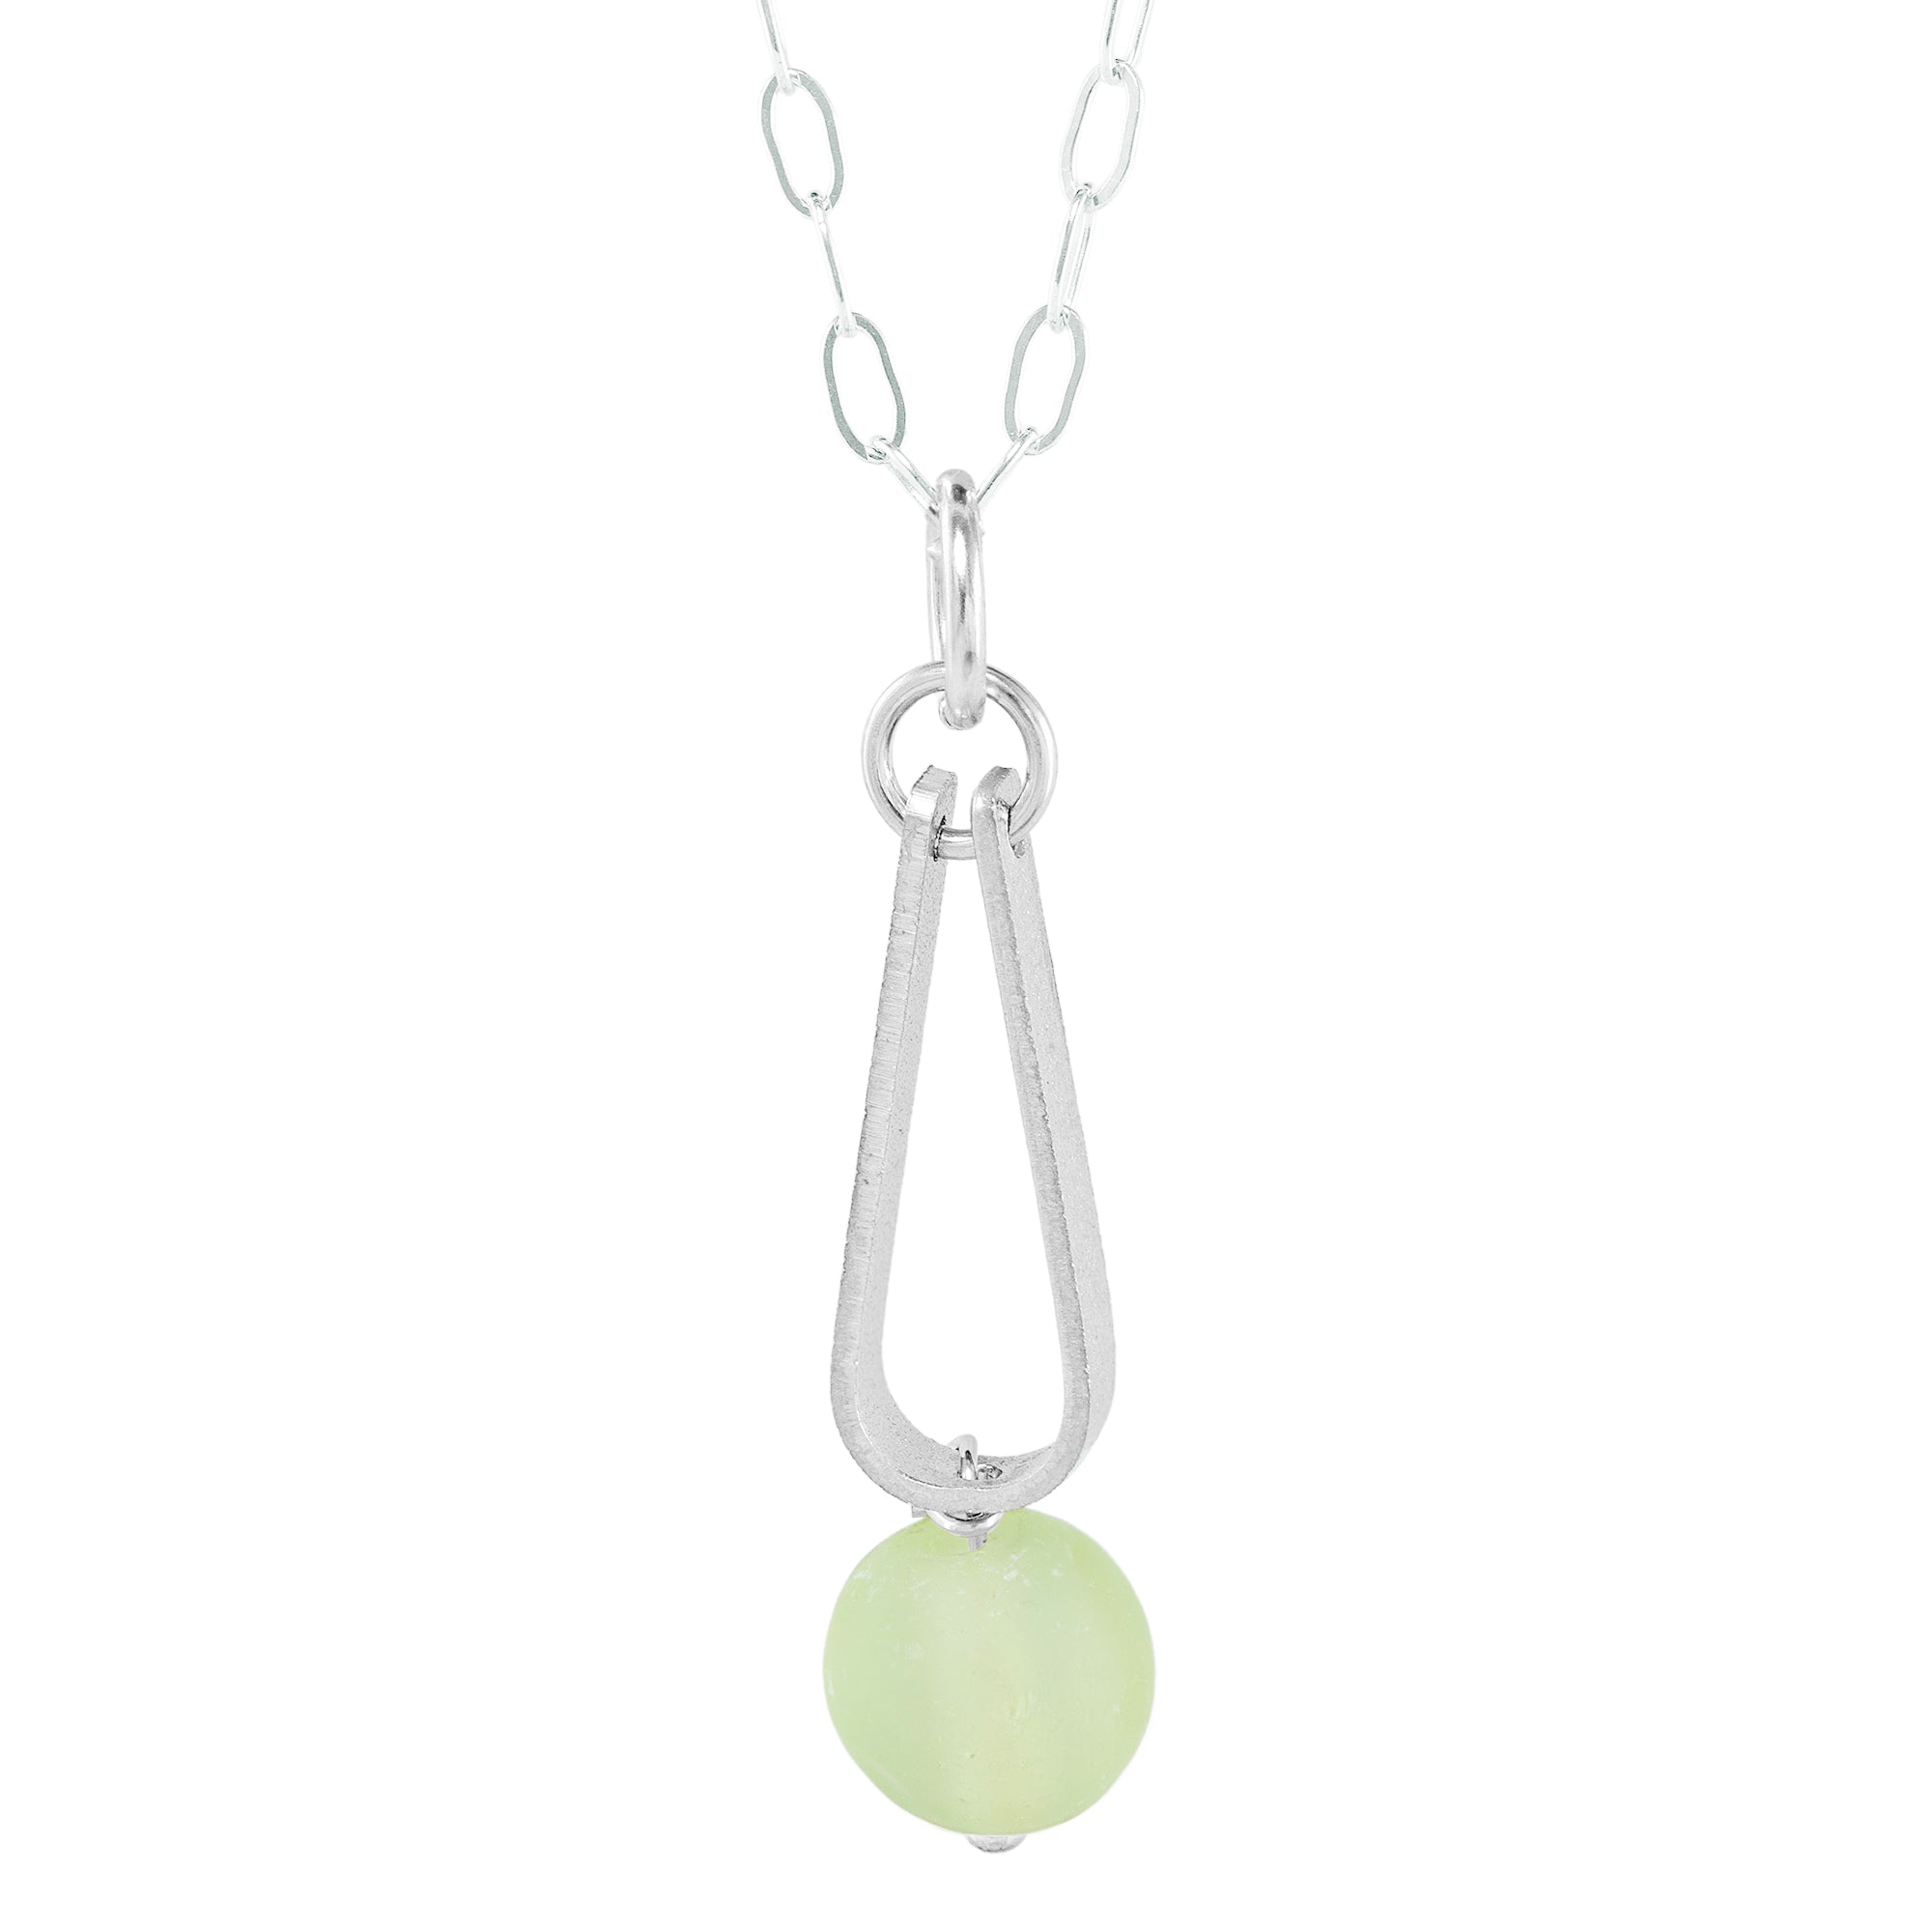 Light Pastel Sage Green Round Recycled Glass Ball and Sterling Silver Teardrop Shaped Pendant Necklace